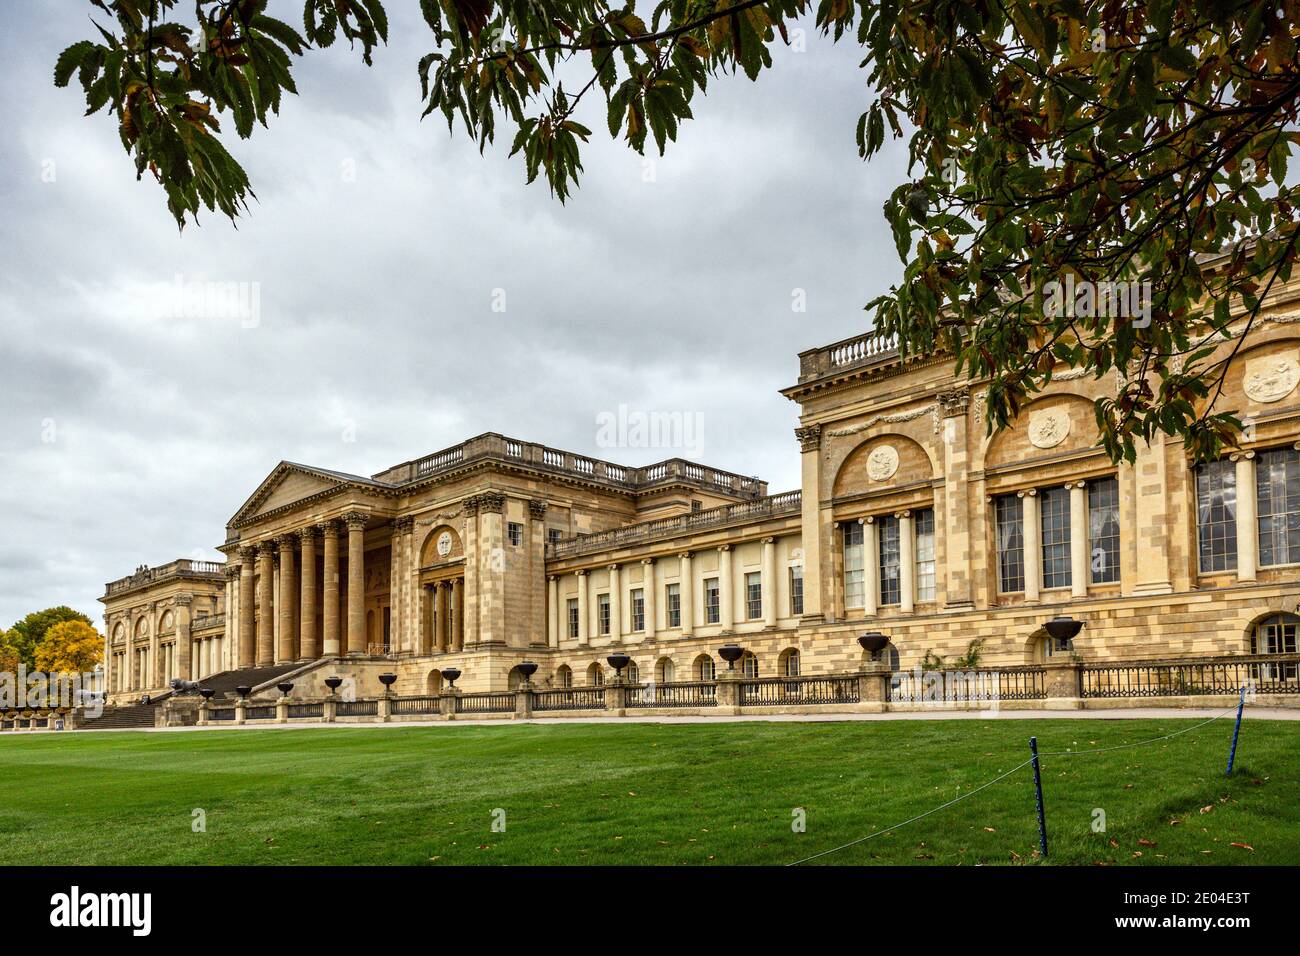 The southern facade of the Grade I listed Stowe House, Buckinghamshire, England, UK Stock Photo